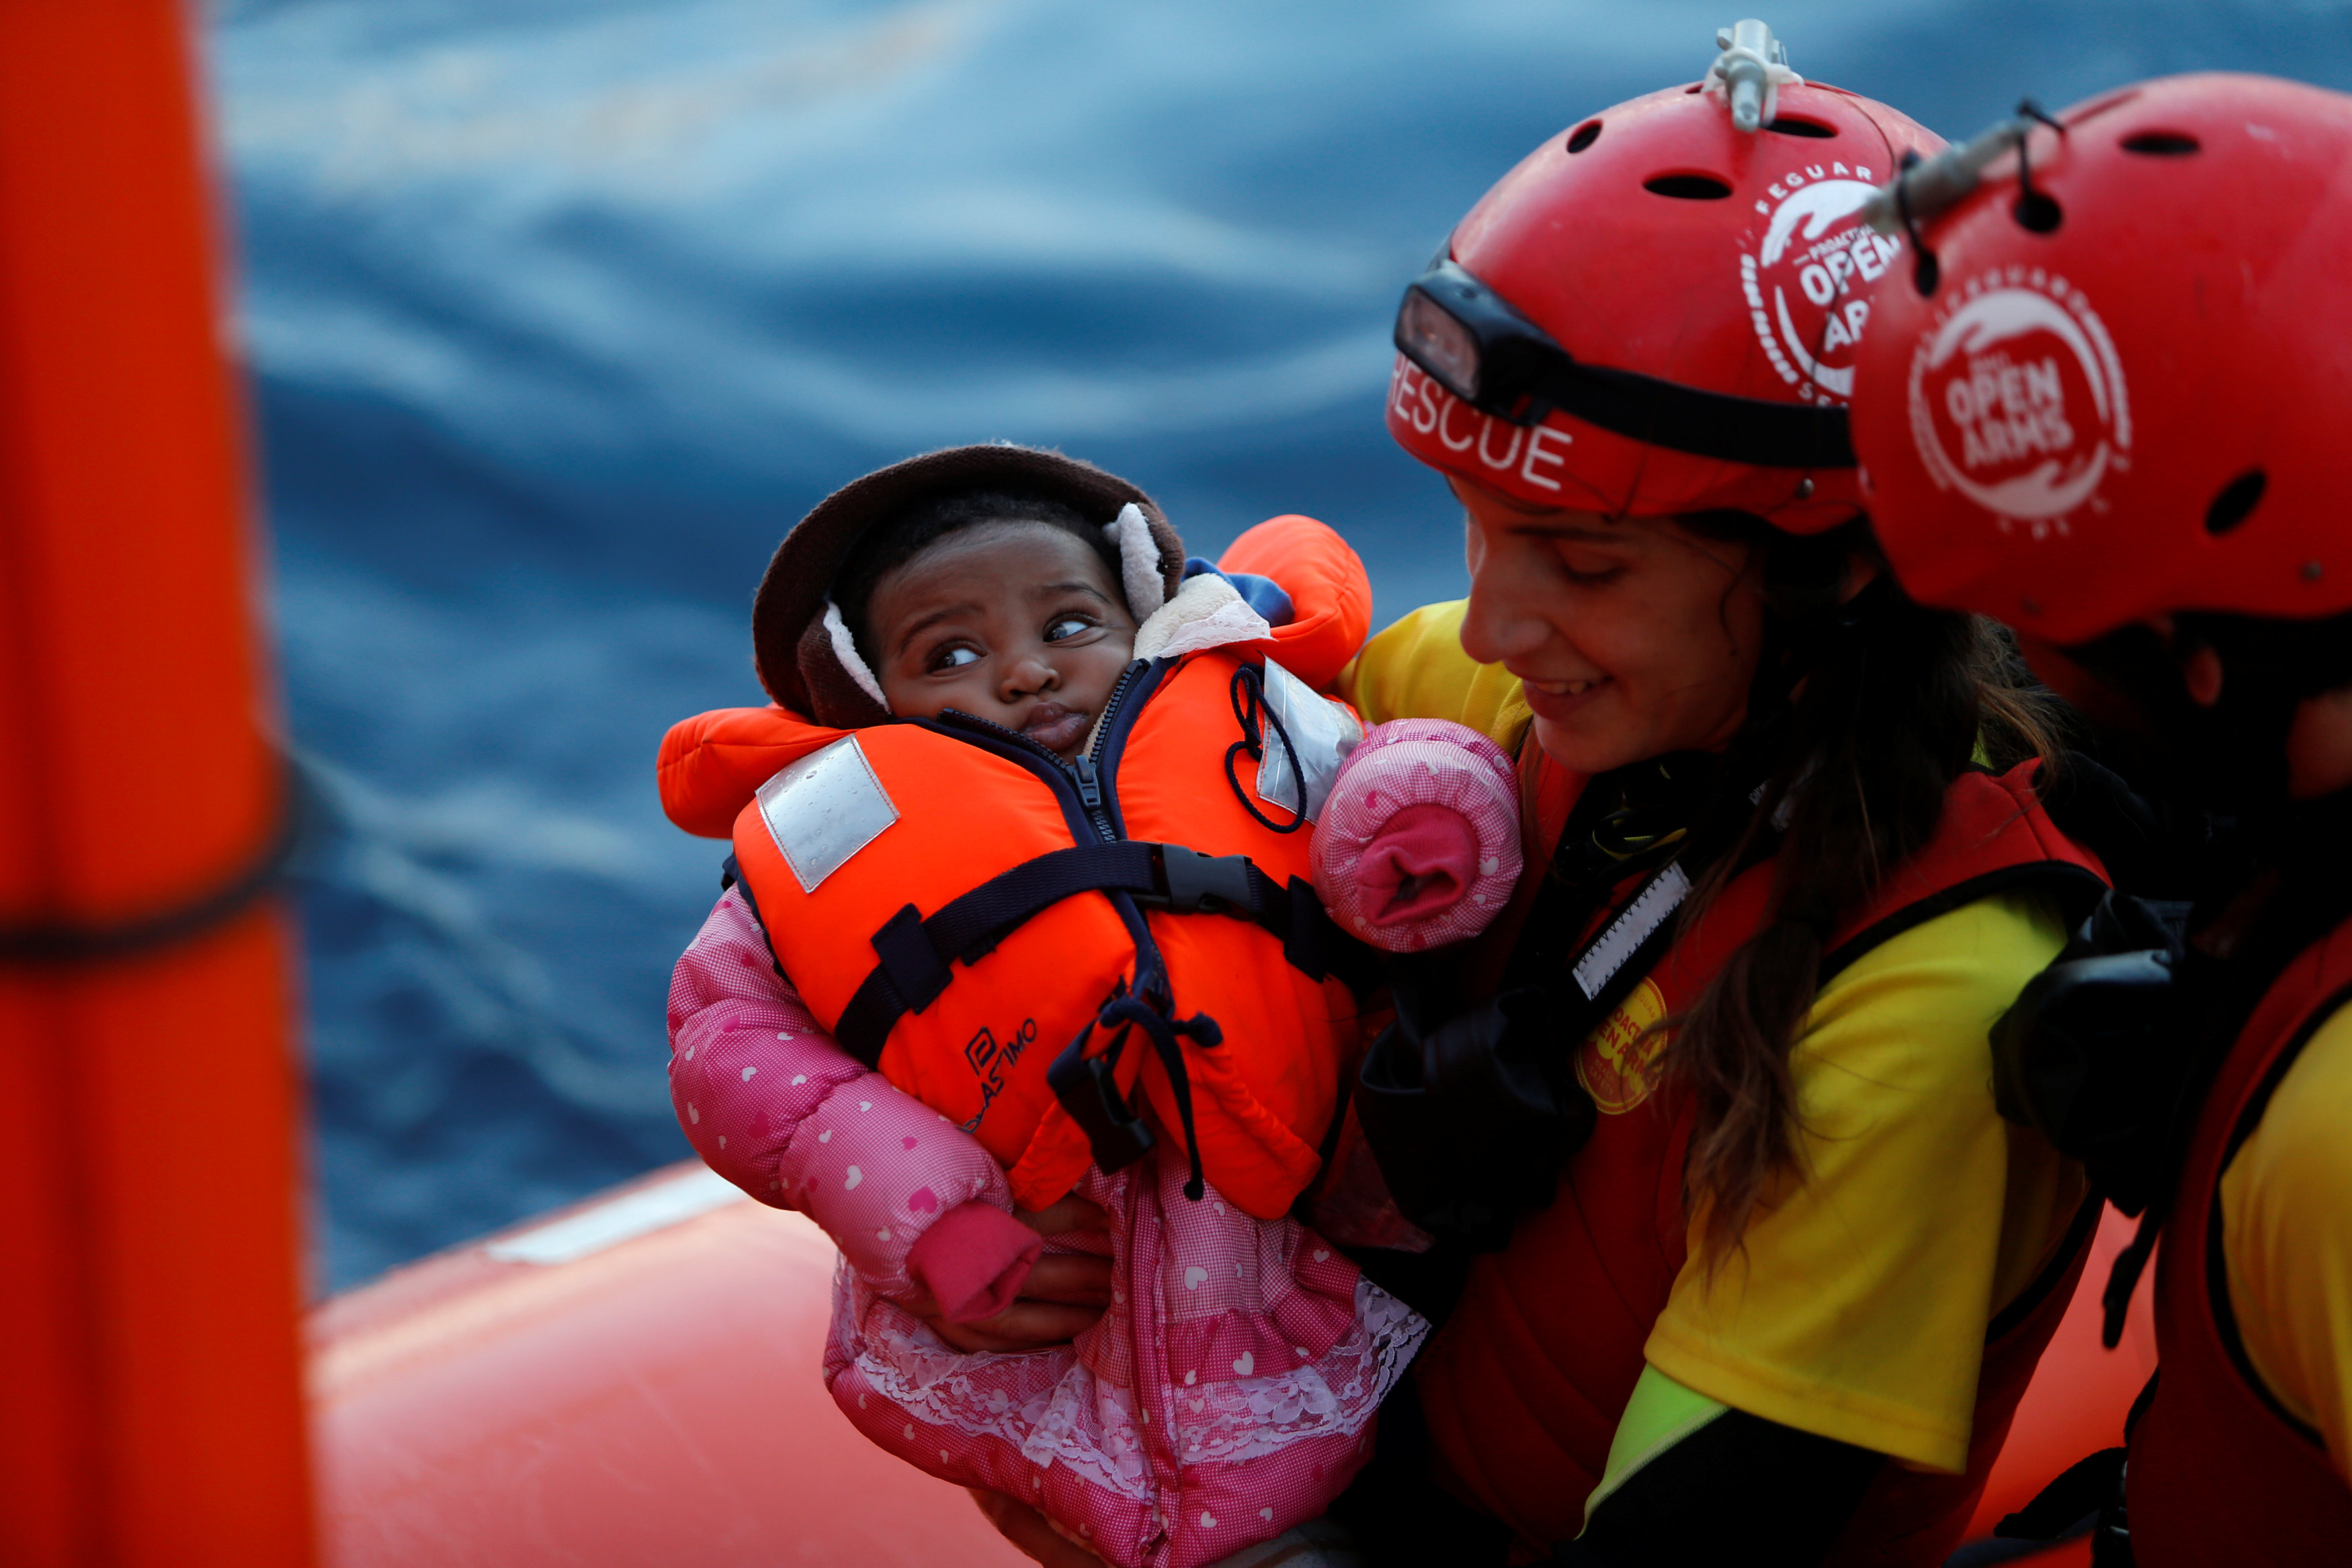 Heroes from Spanish NGO saving migrants' lives in Greece